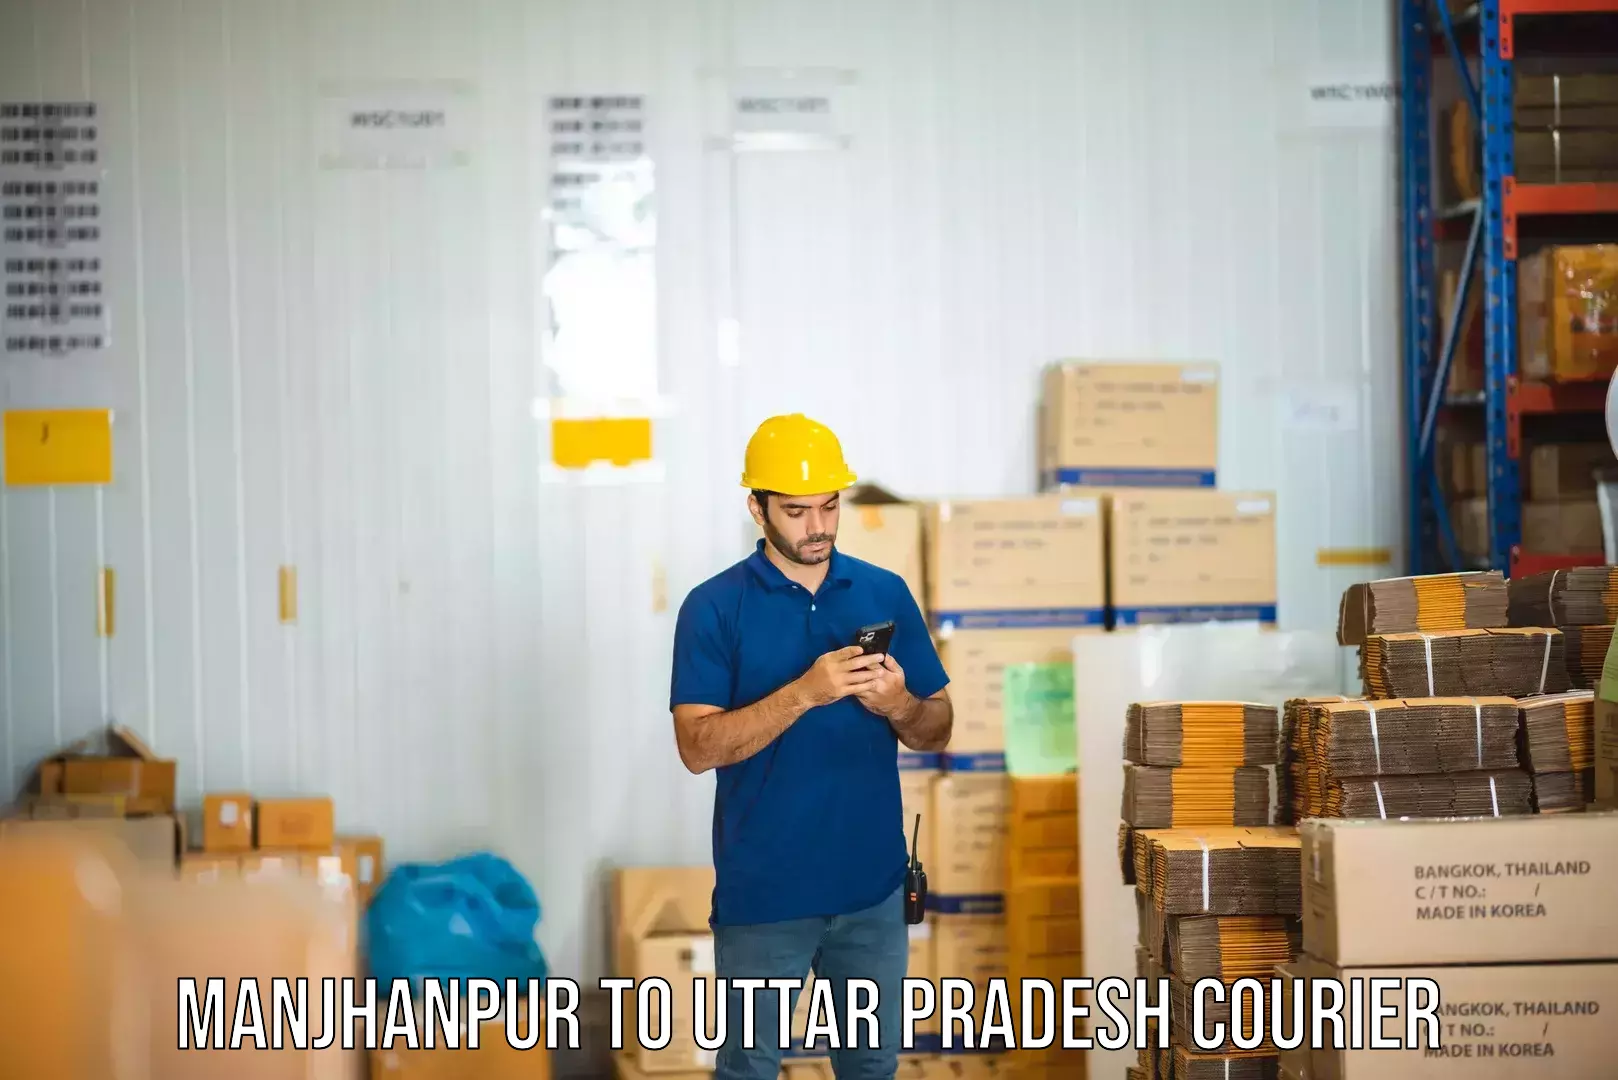 On-demand shipping options Manjhanpur to Agra